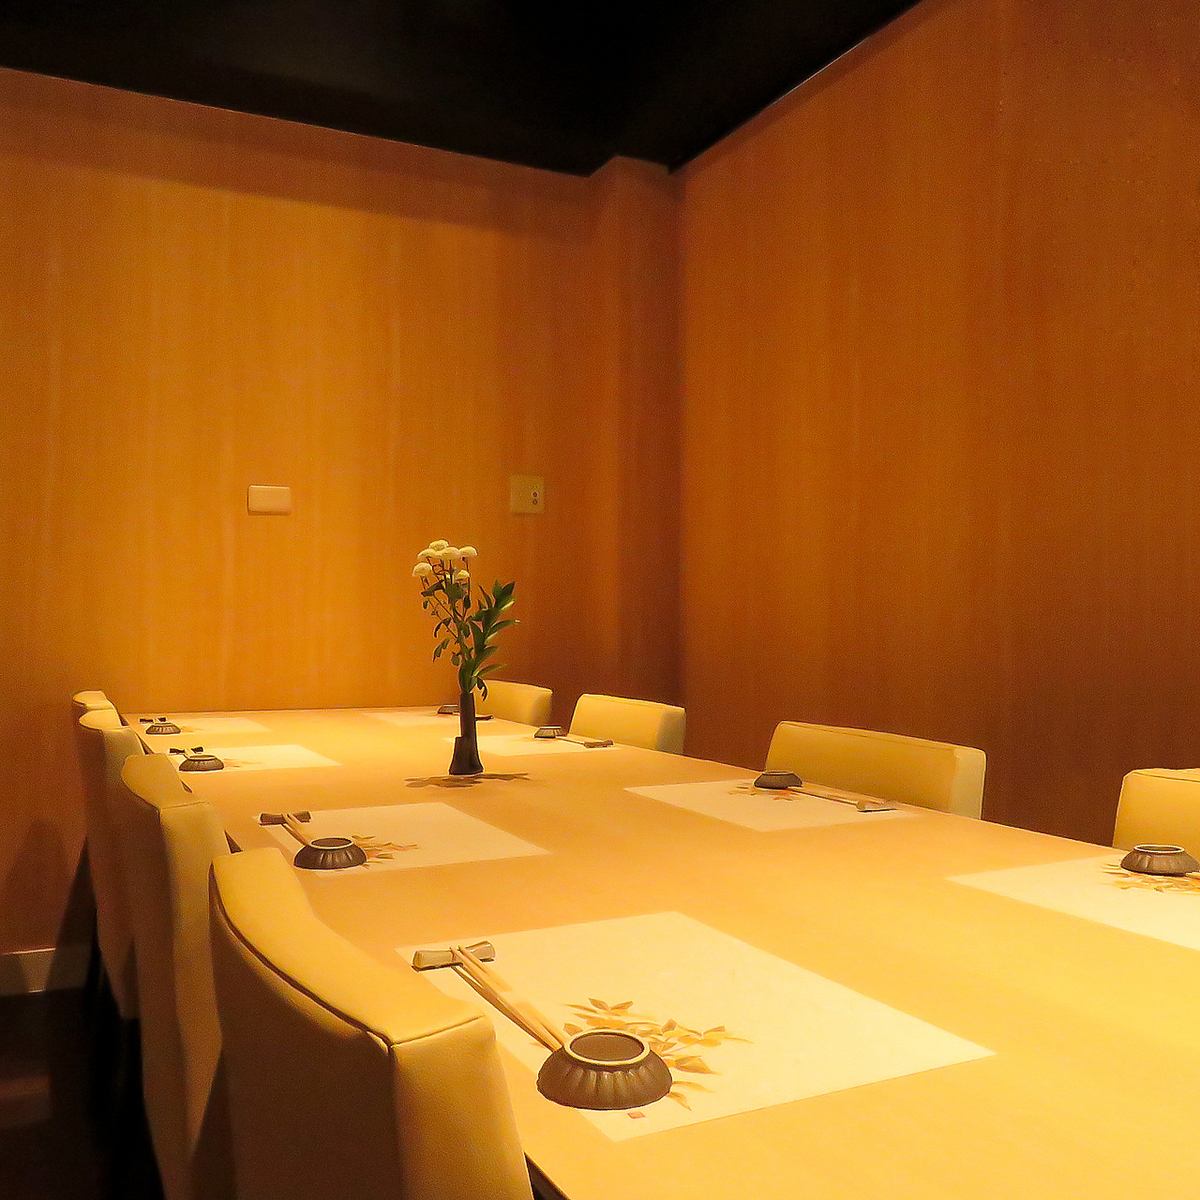 There are two large and small private rooms available.Groups of up to 10 people are also welcome!